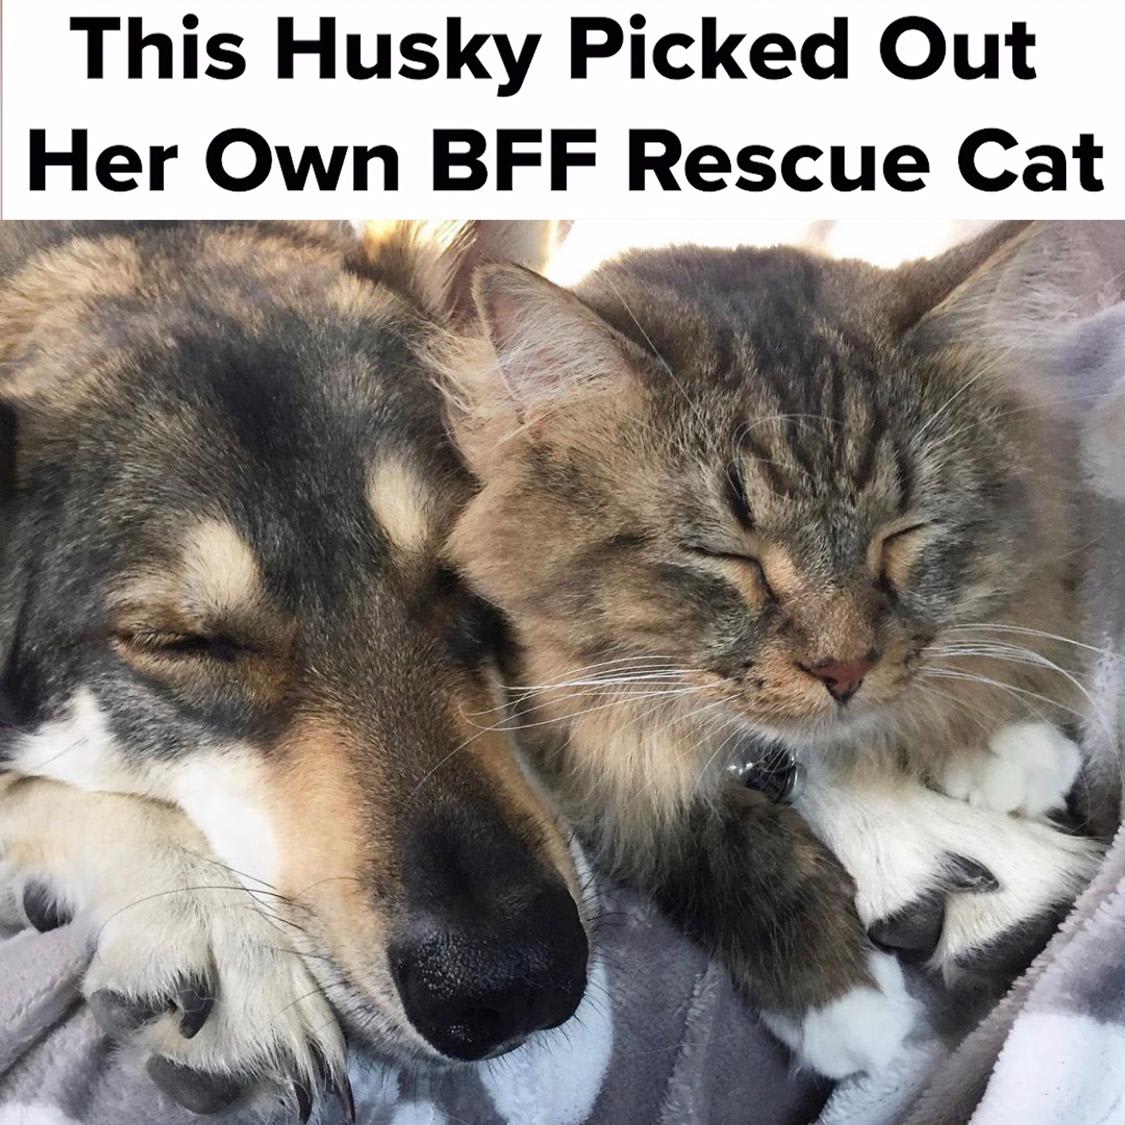 This Husky Picked Out Her Own BFF Rescue Cat